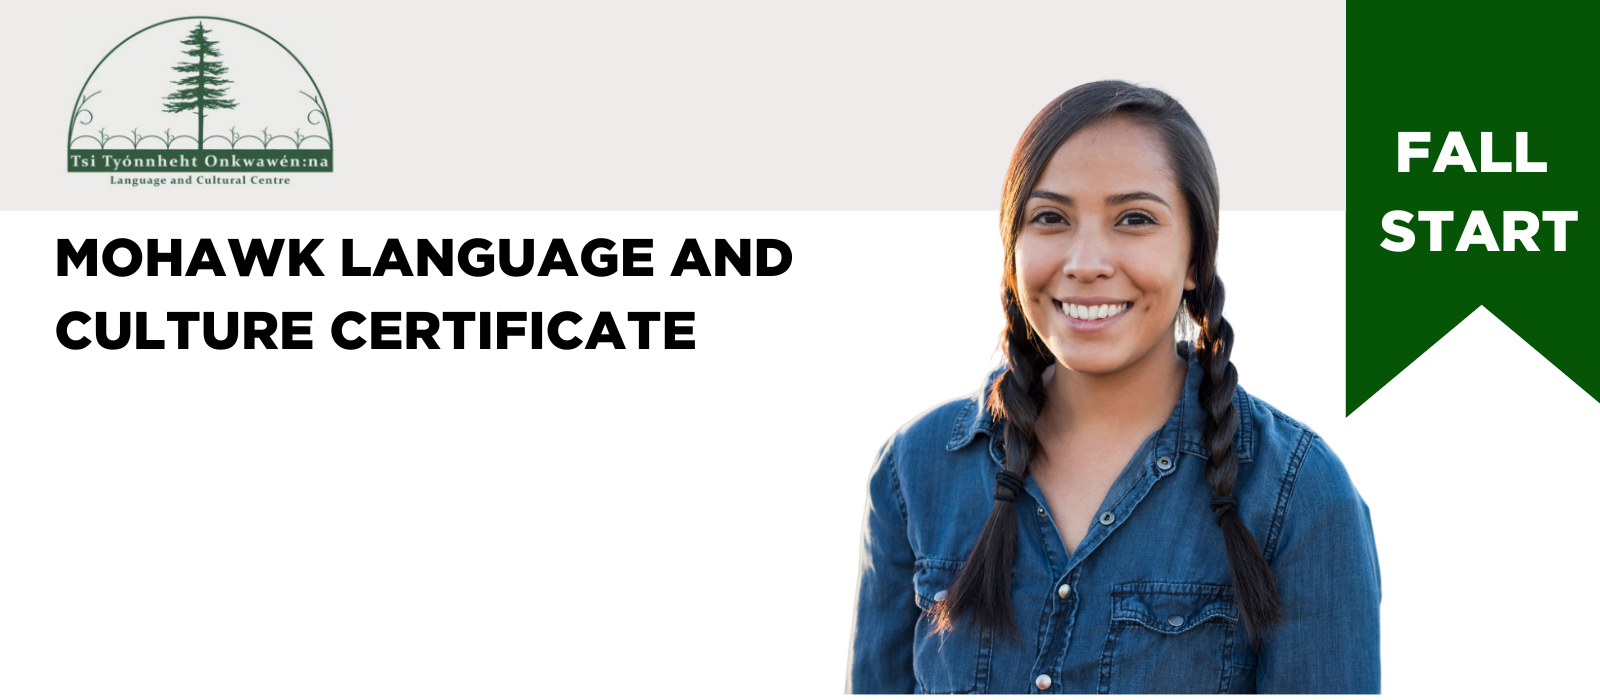 Woman on a white background. Green ribbon in the top right that says Fall Start. Certificate in Mohawk Language and Culture.